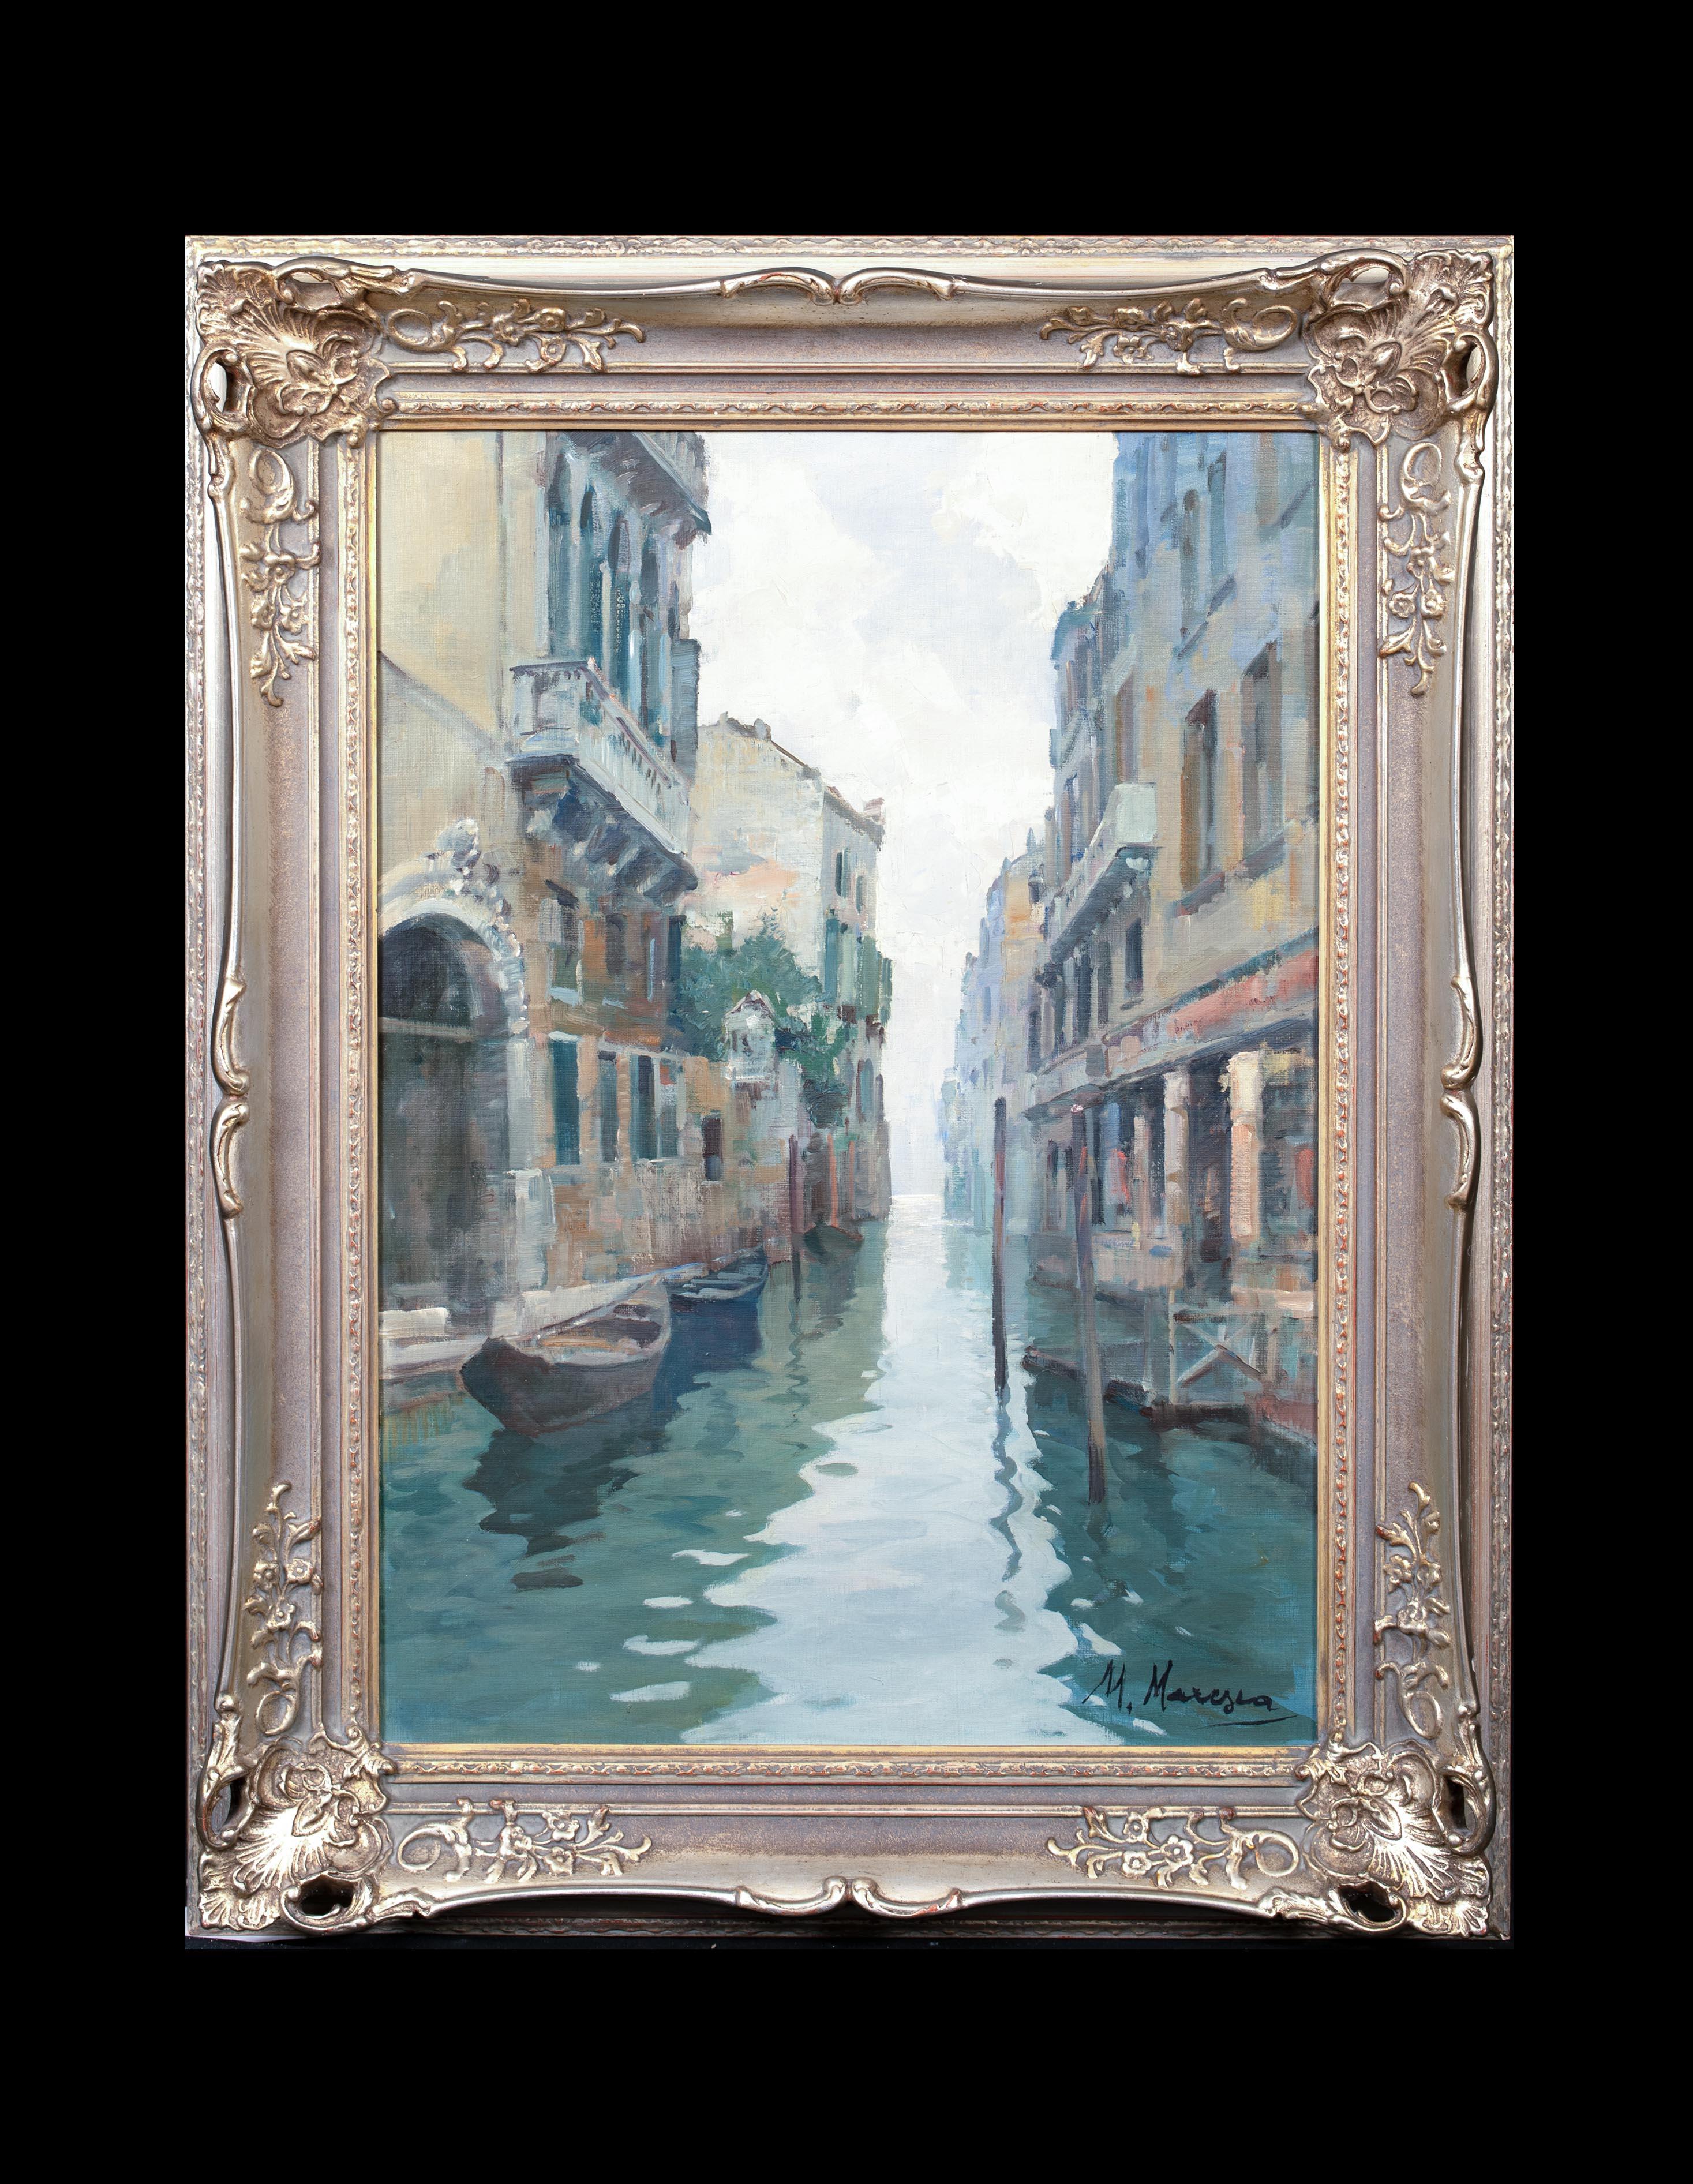 A Venice Backwater Canal, early 20th Century

by MARIO MARESCA (1877-c.1959)

Large 19th Century Italian Venetian Backwater Canal, oil on canvas by Mario Maresca. Excellent quality and condition view of a Venetian canal painted with muted tones and